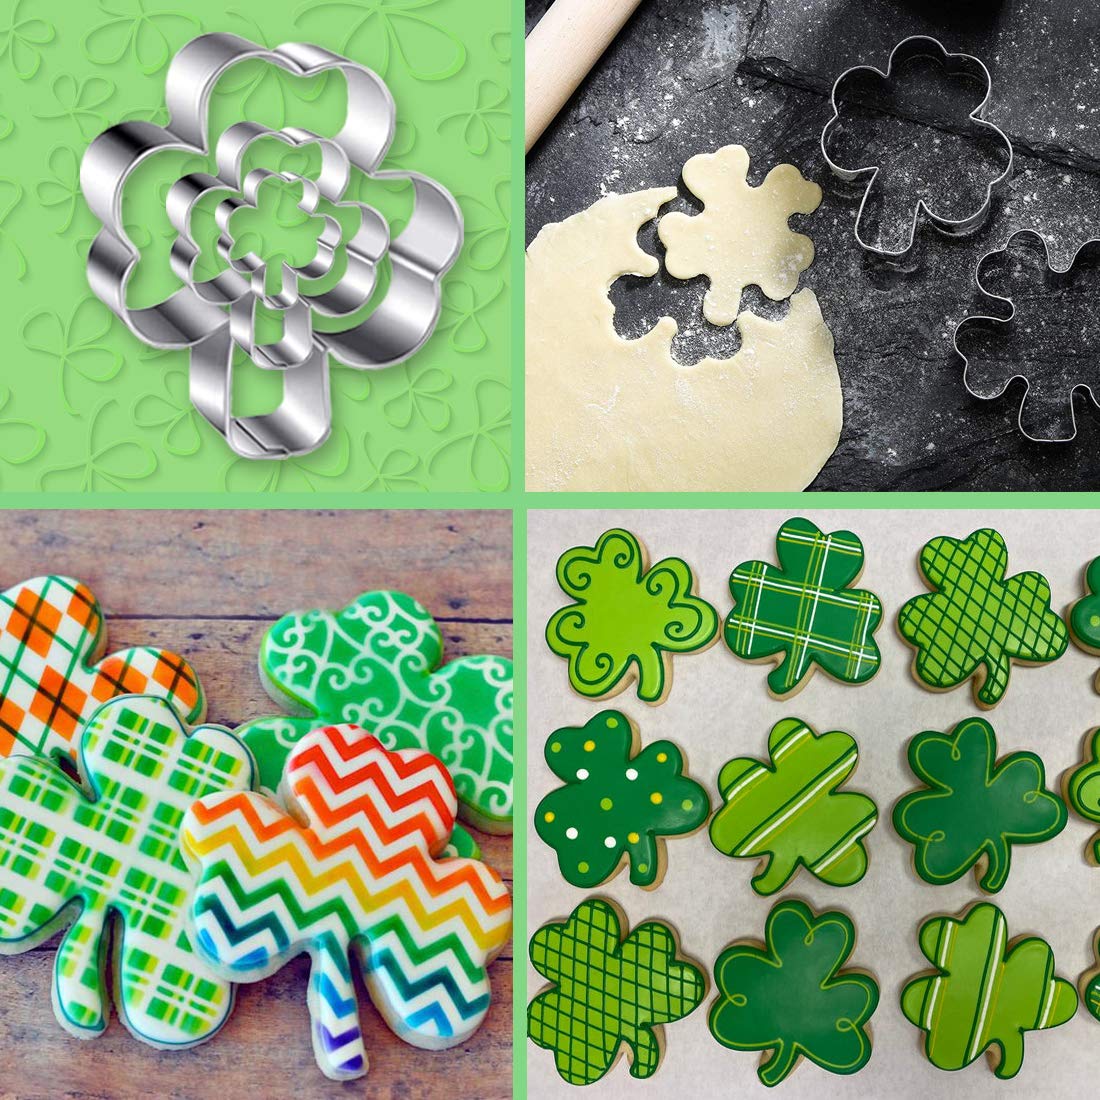 Shamrock Cookie Cutters Set, 6 Pieces St. Patrick's Day Clover,Four Leaf Clover Shaped Cookie Cutters Supplies4'', 3'',1.8' Biscuit Cutters for Saint Patrick's Day Irish Party